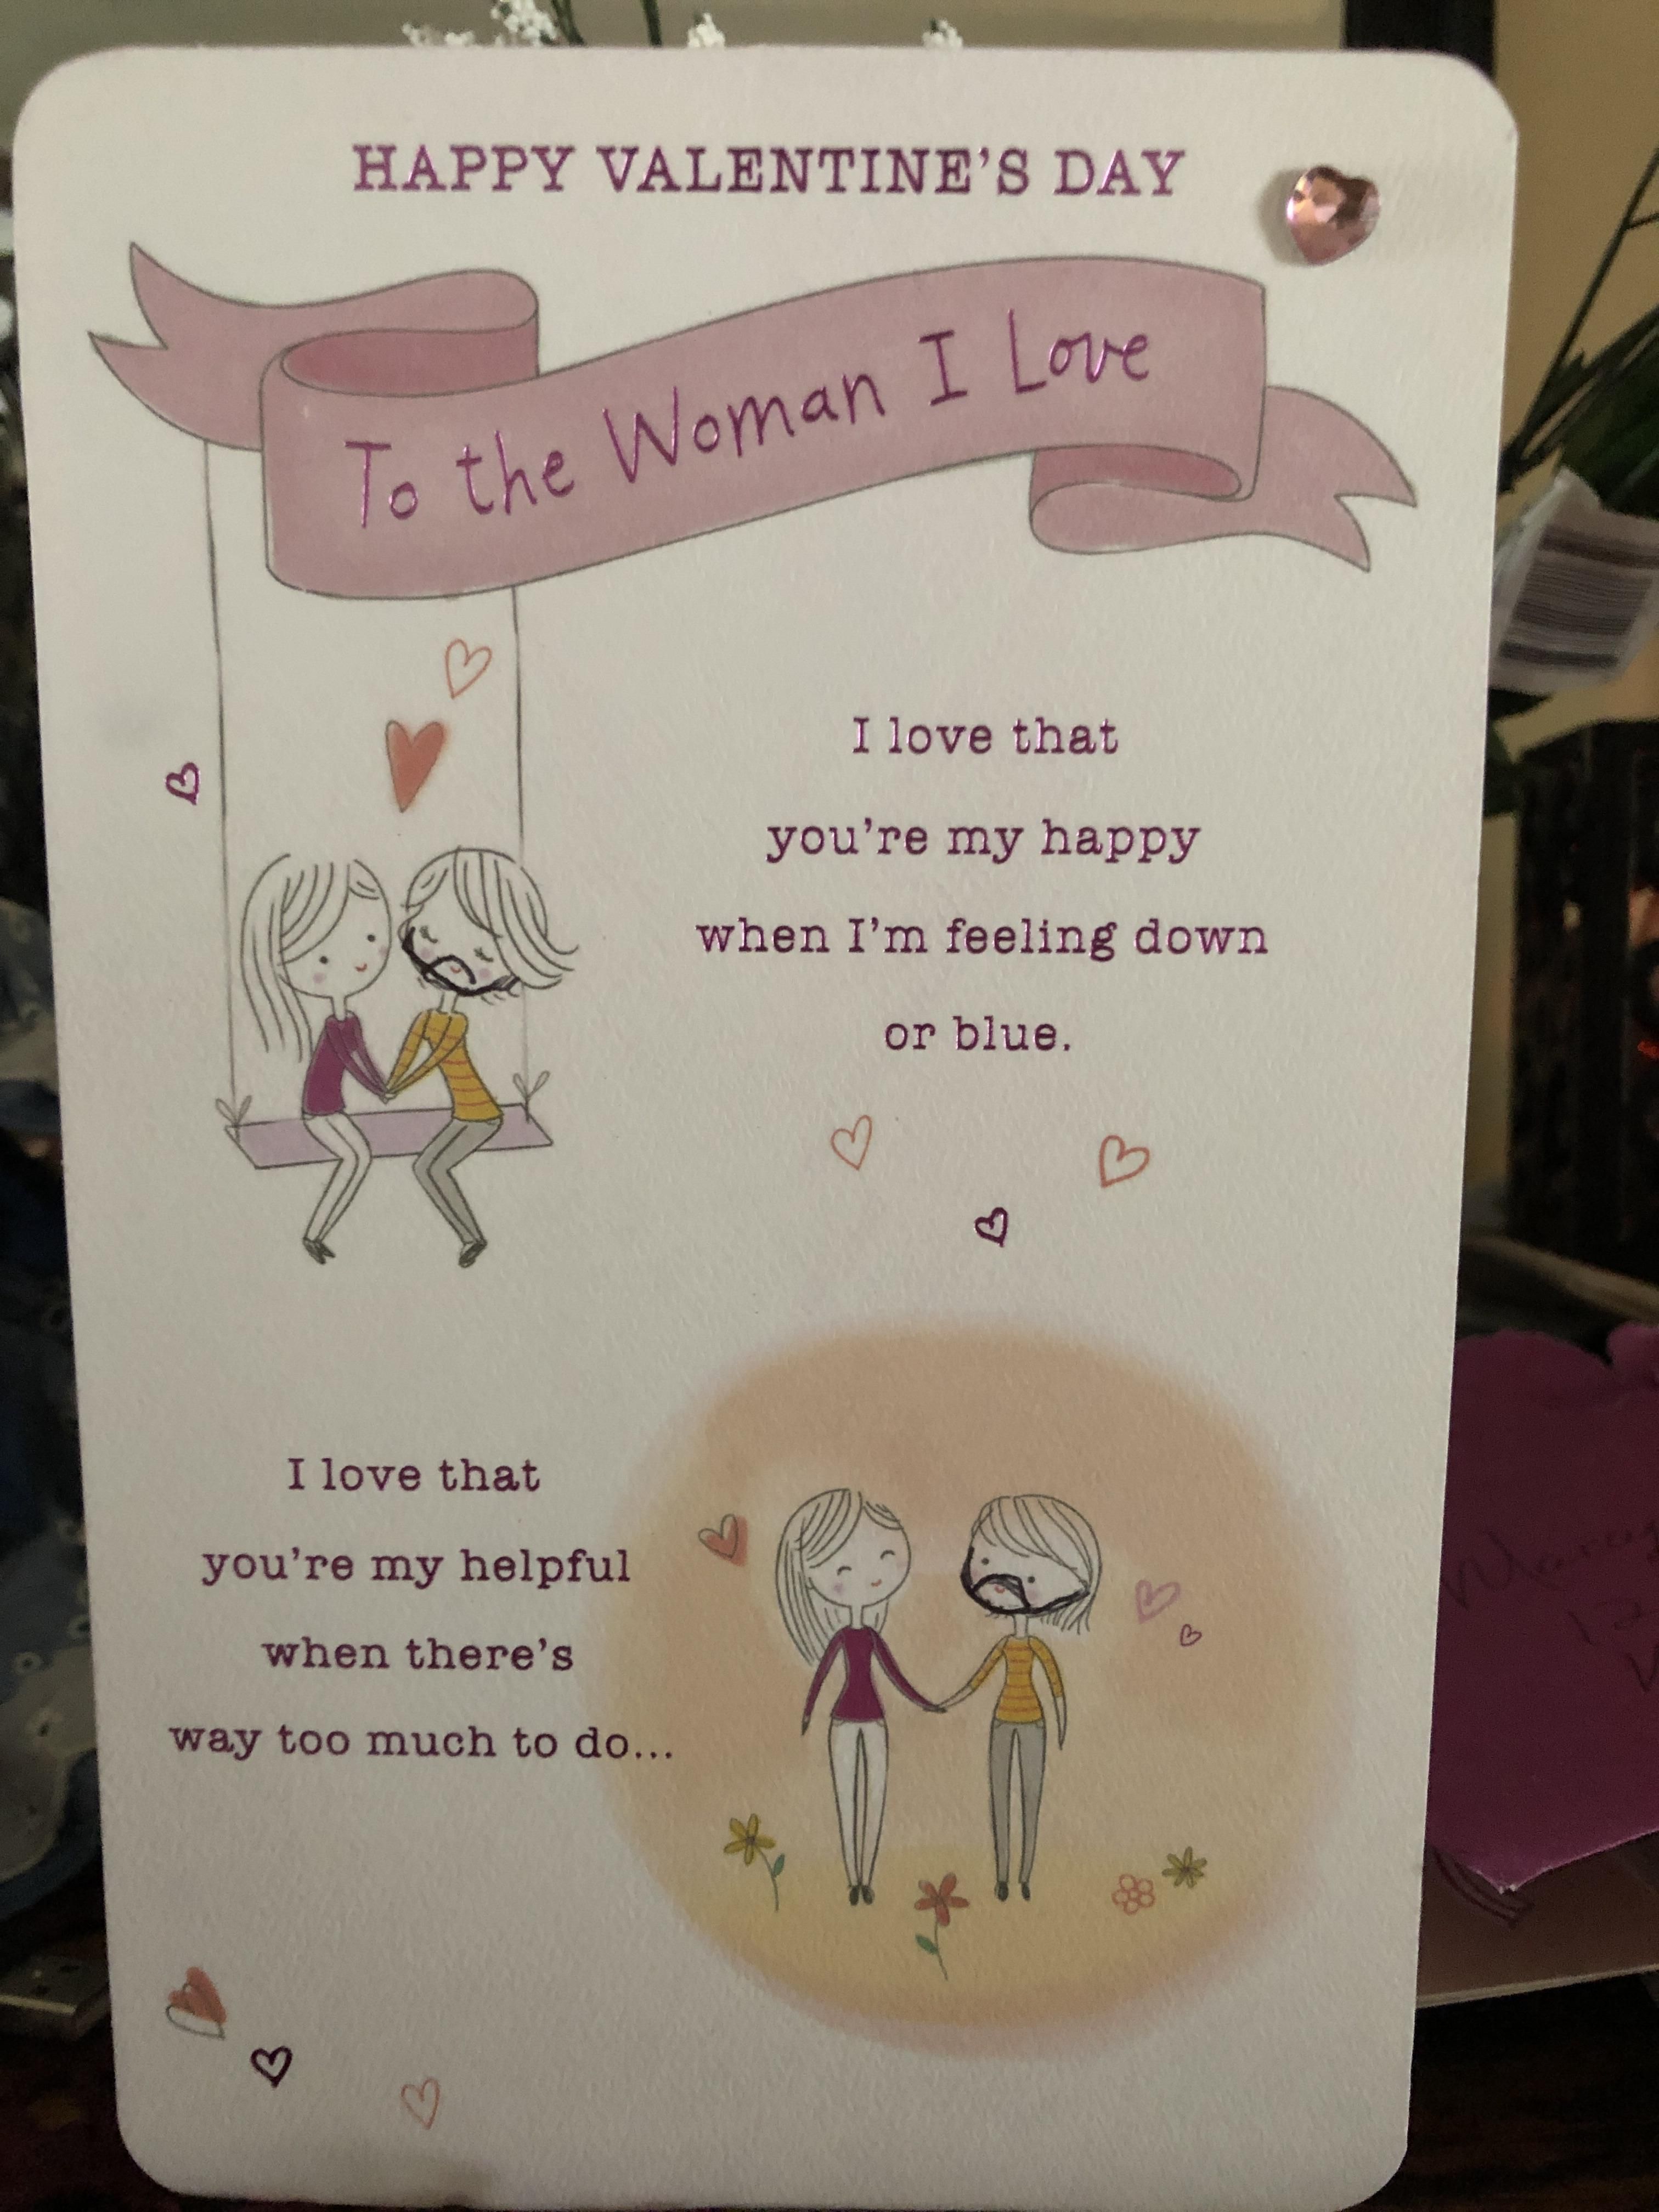 My dad accidentally bought a same sex Valentine’s Day card and instead of getting another card, he drew a little beard on one of the women.